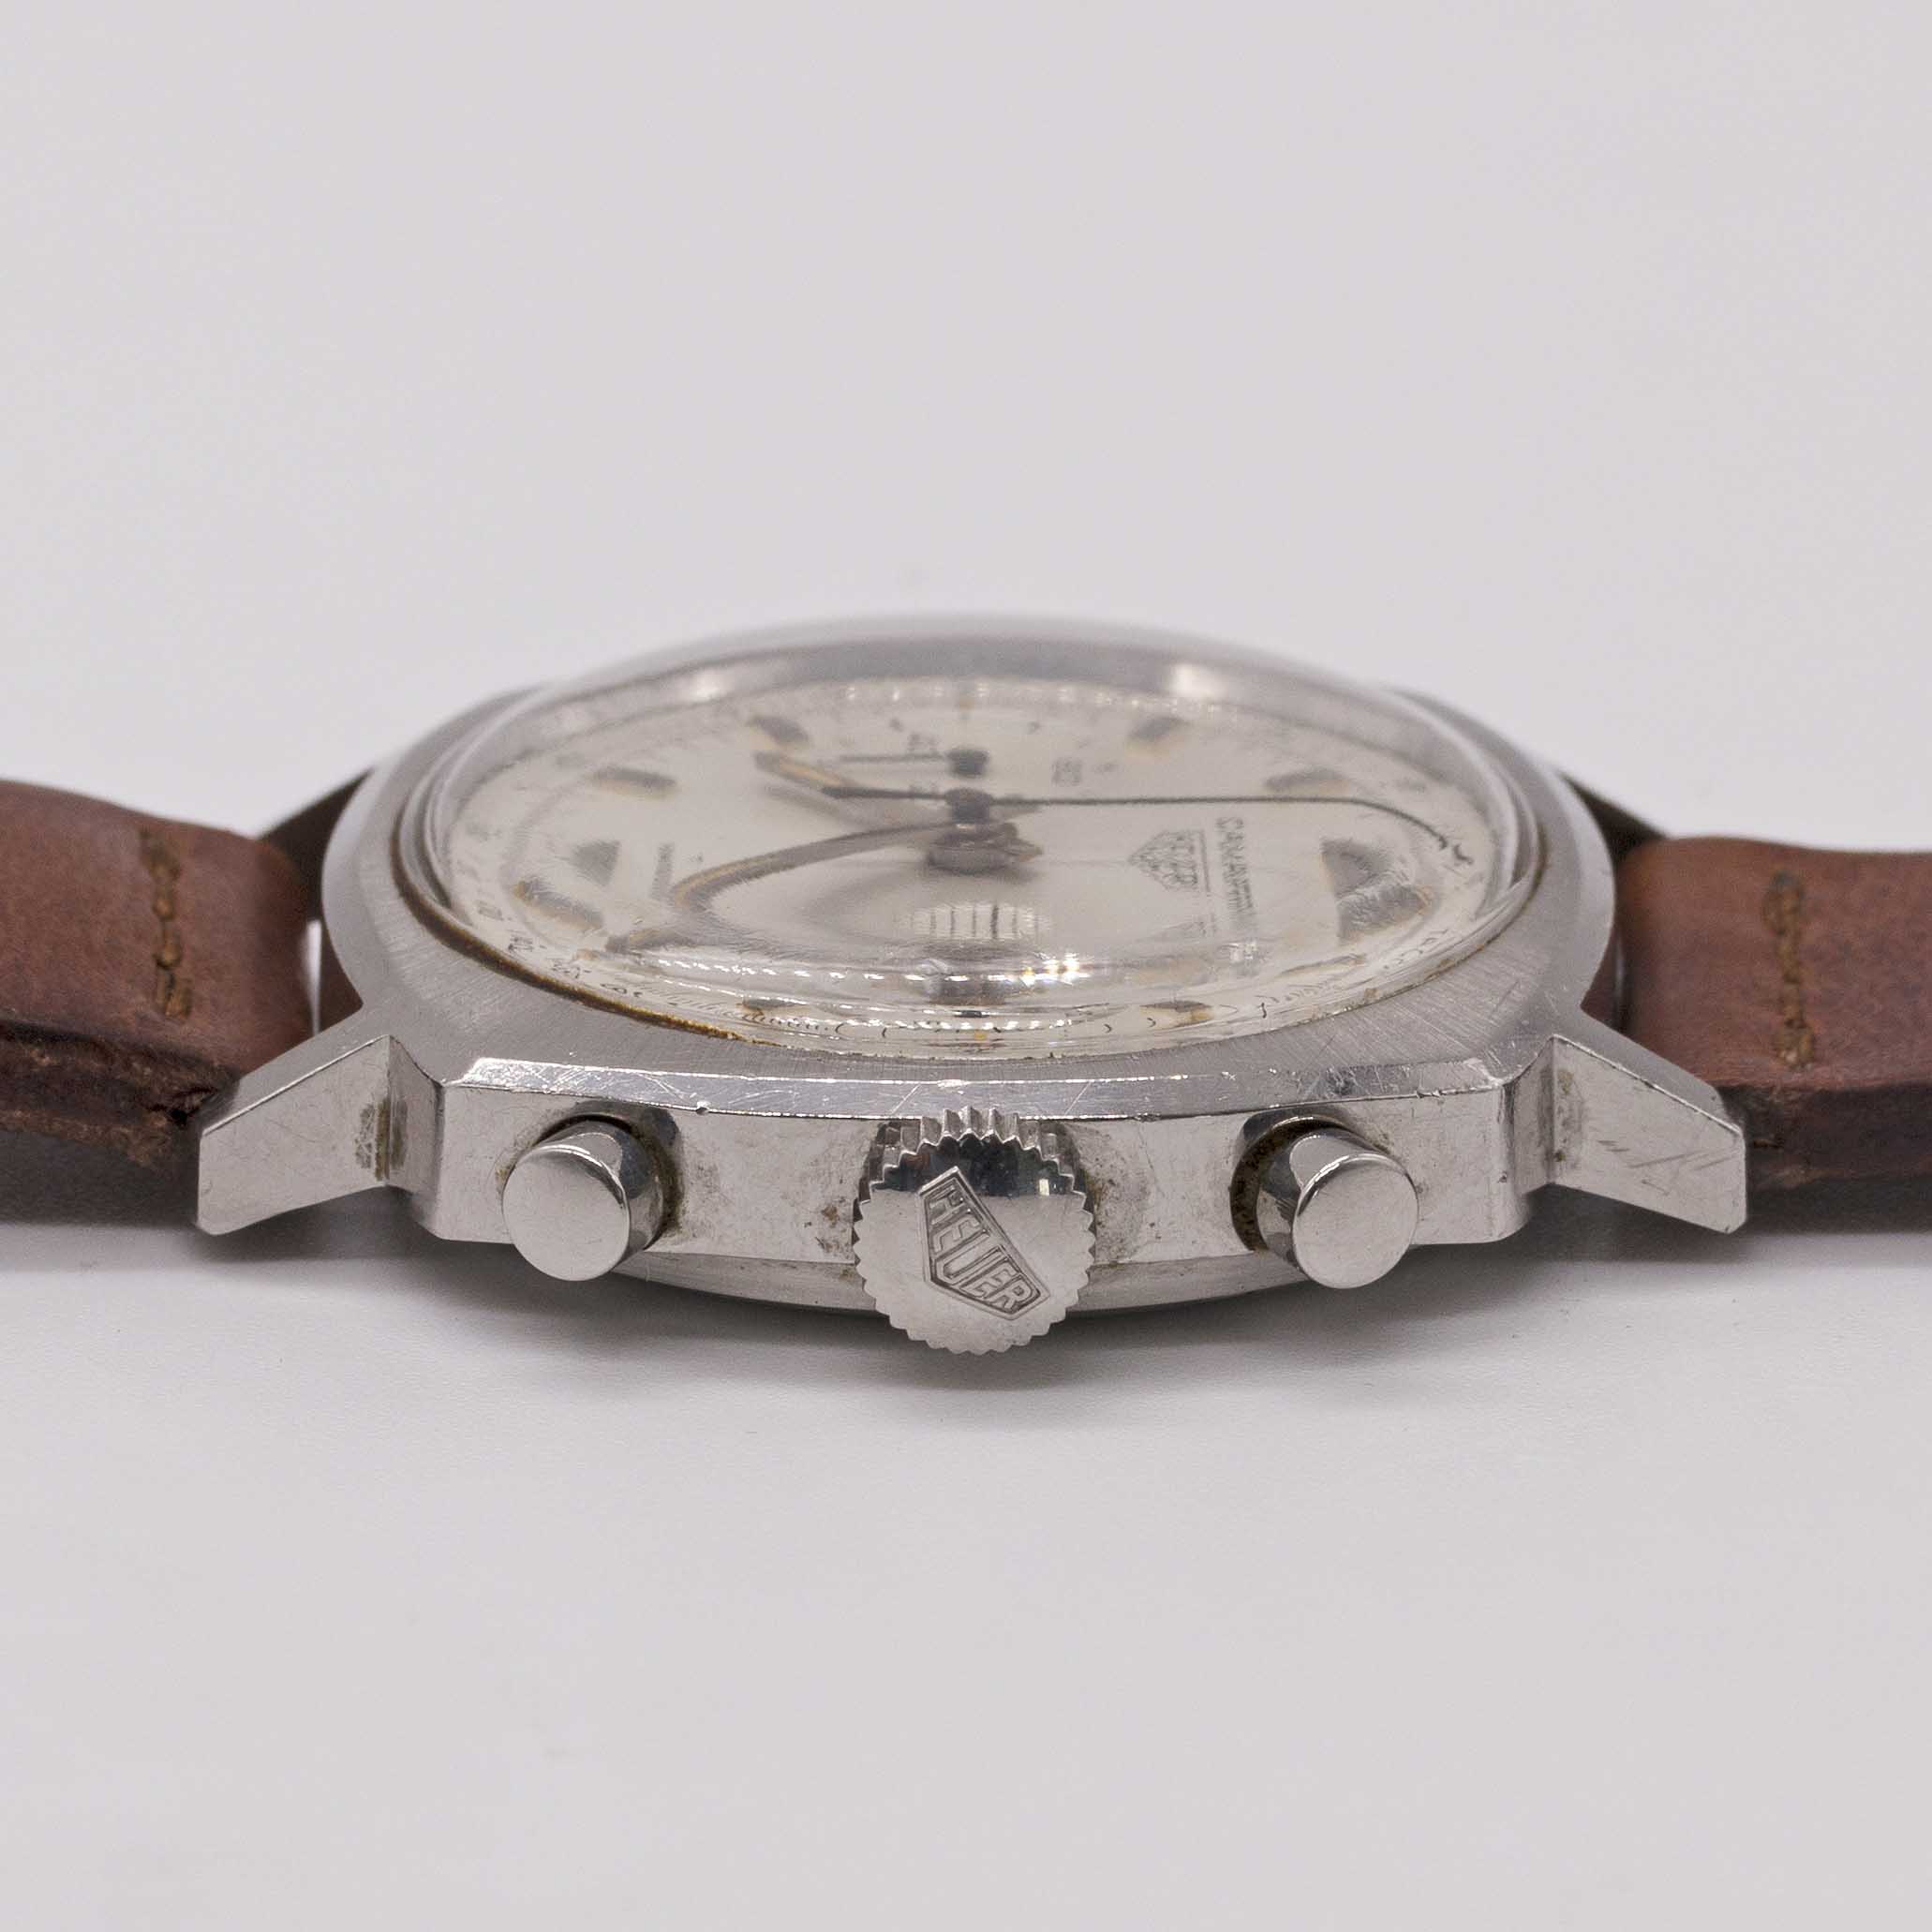 A GENTLEMAN'S STAINLESS STEEL HEUER CAMARO CHRONOGRAPH WRIST WATCH CIRCA 1970, REF. 9220T WITH - Image 7 of 9